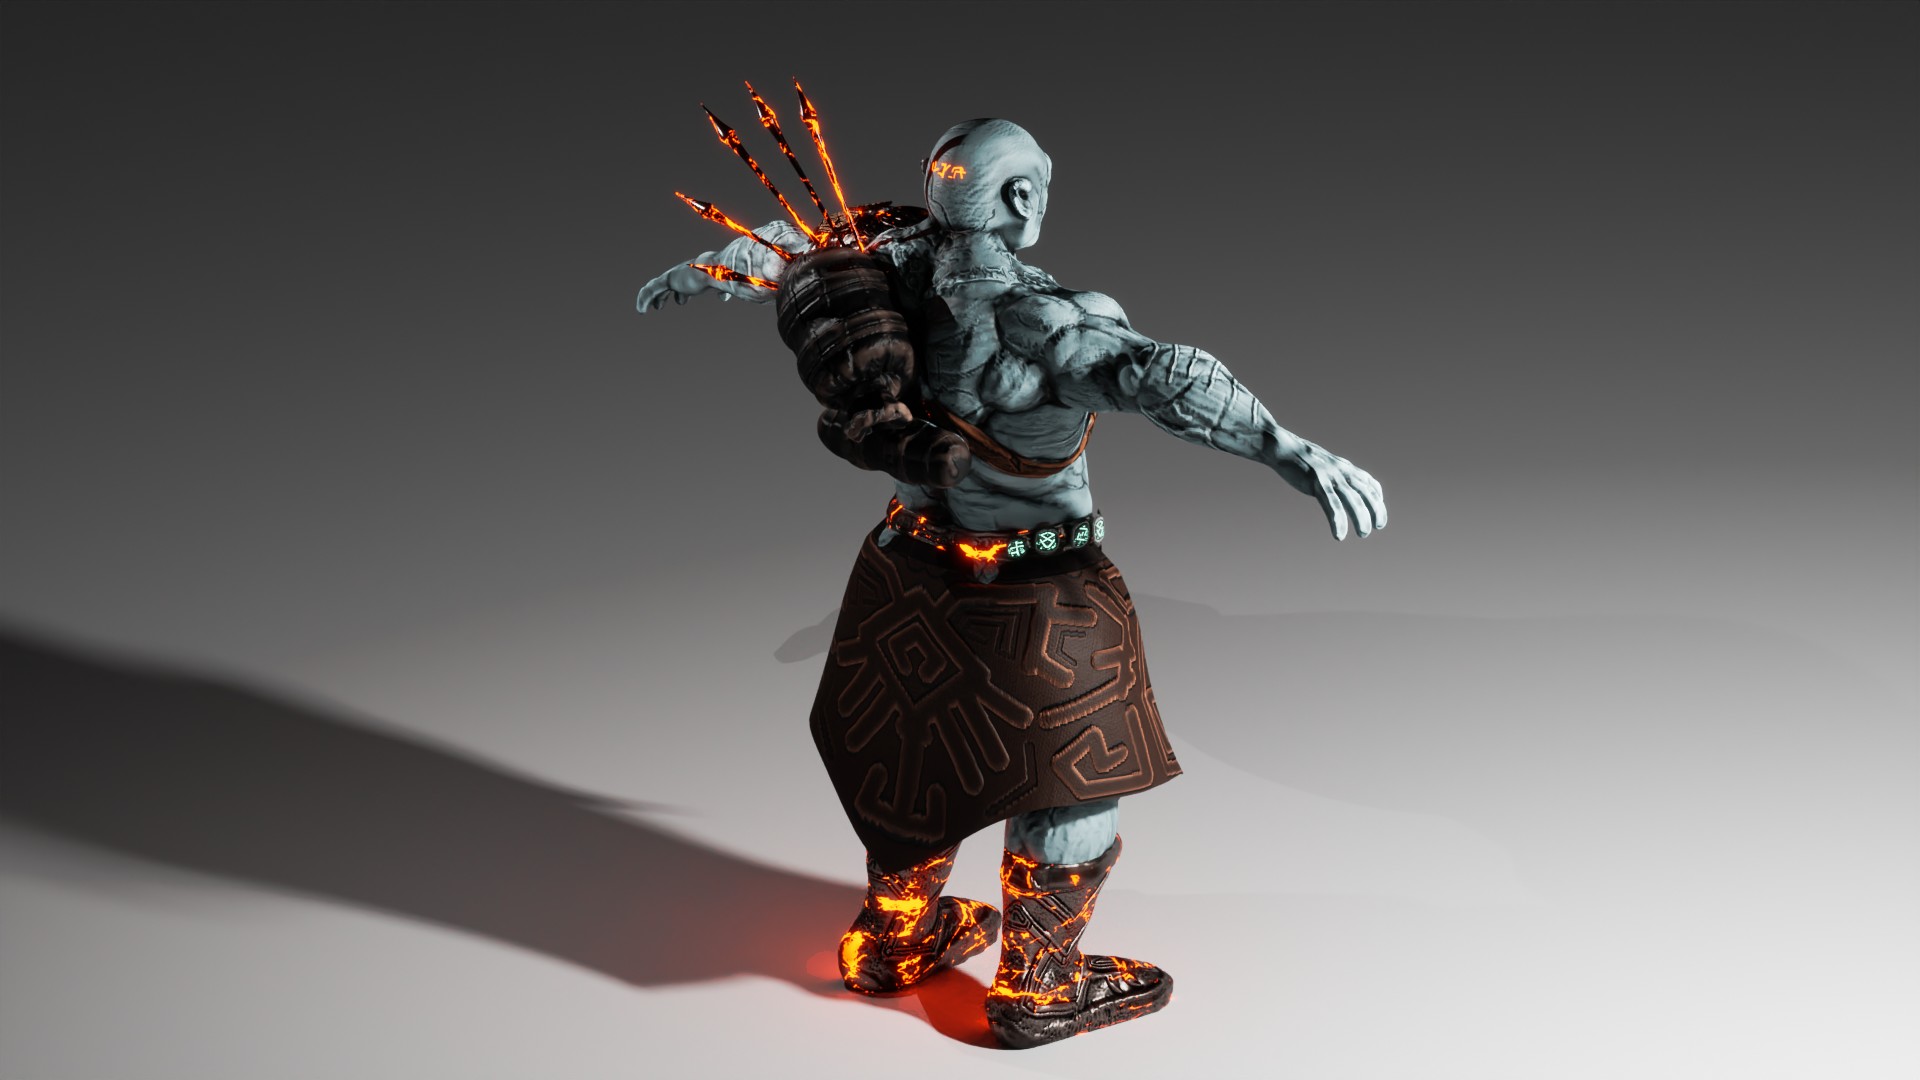 Low Poly Fantasy Runic Orc Warrior